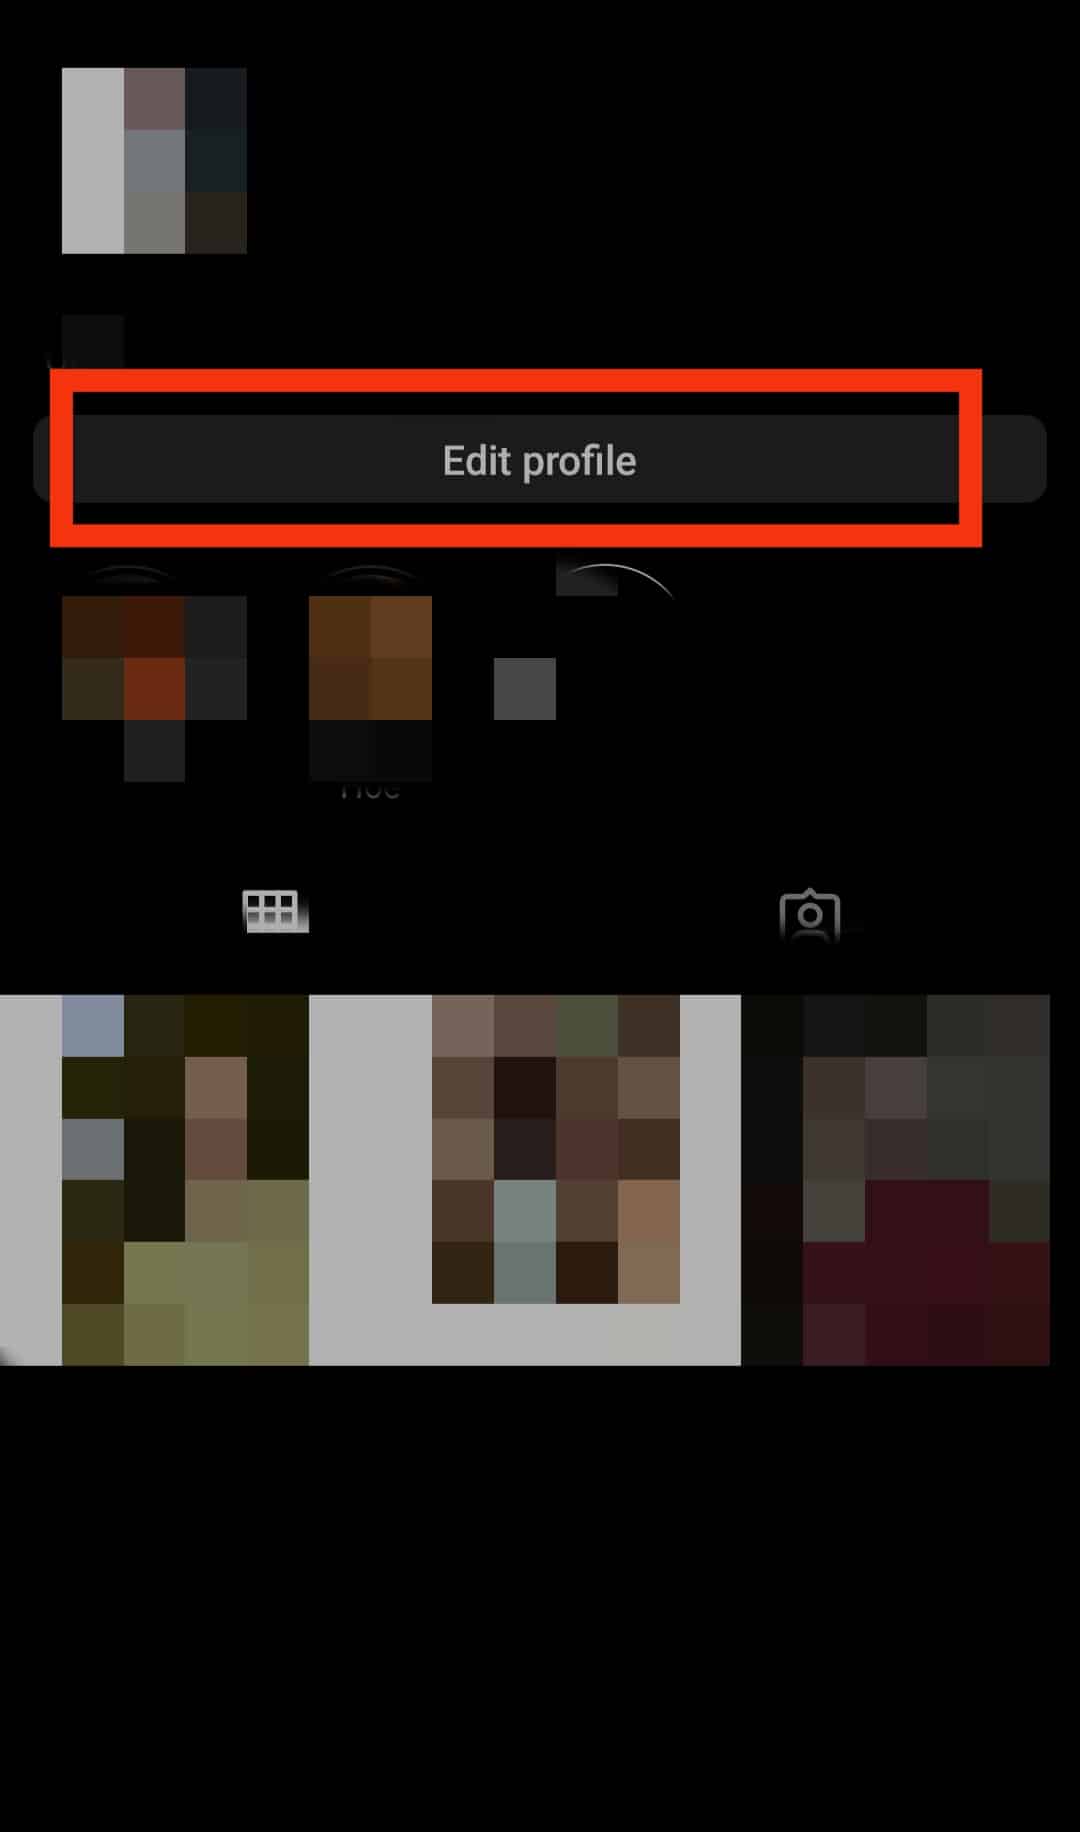 Go to Profile after opening the app on your phone. Then select Edit profile.